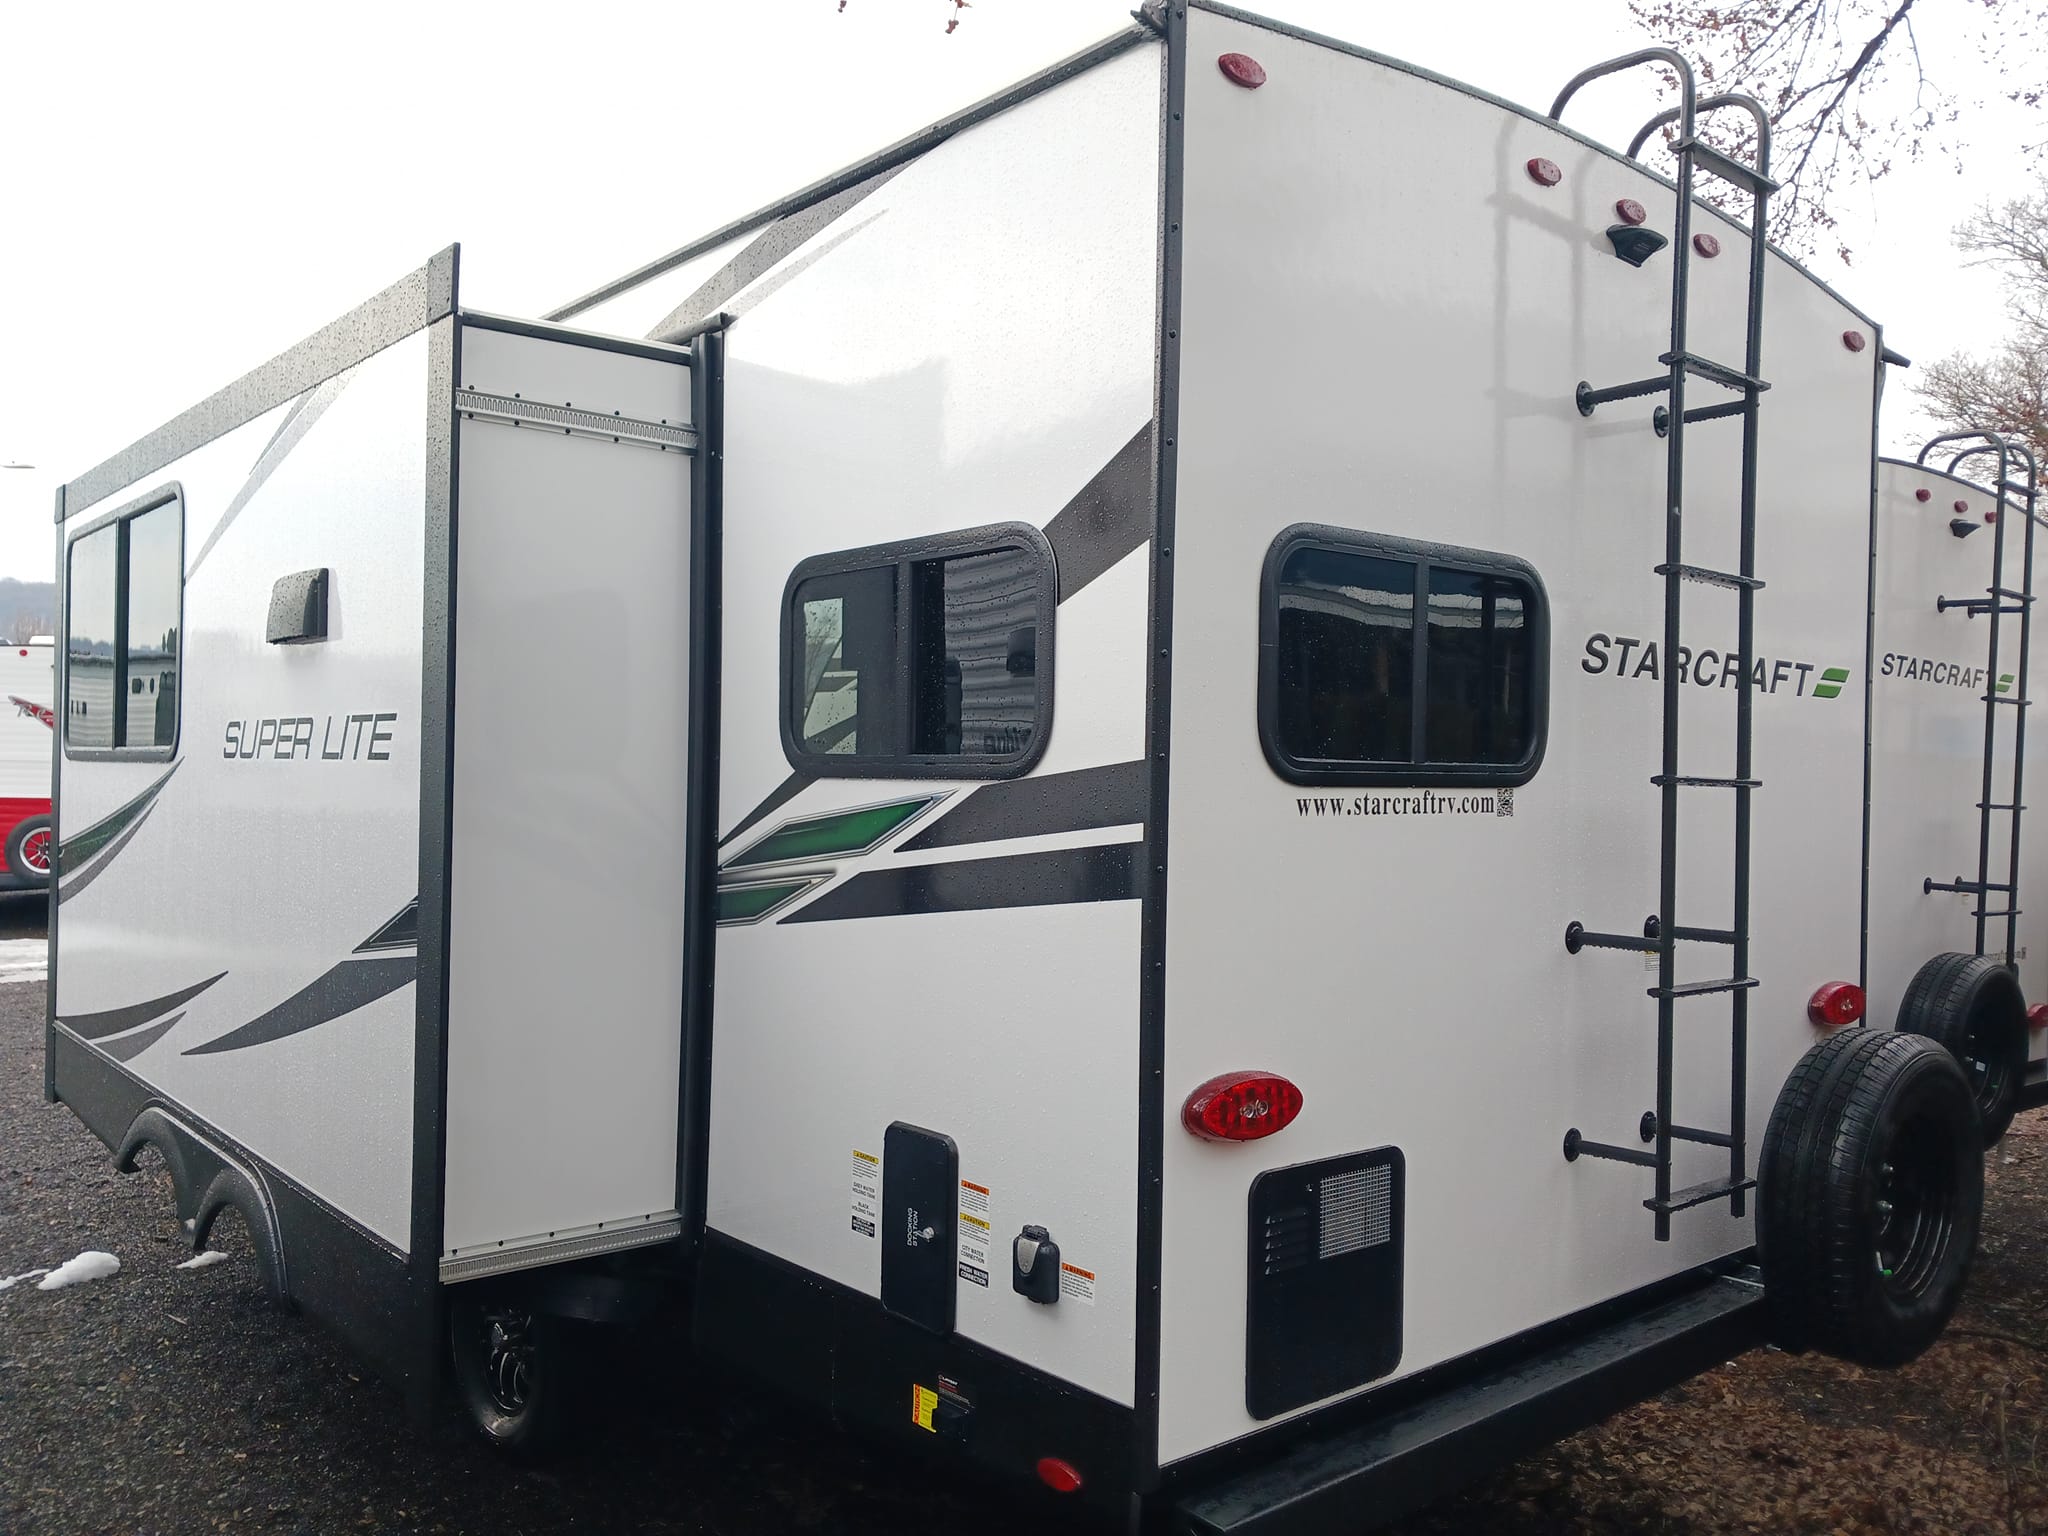 Super Lite 225ck Travel Trailer Simulates Traditional Home Living No Matter The Place 12 